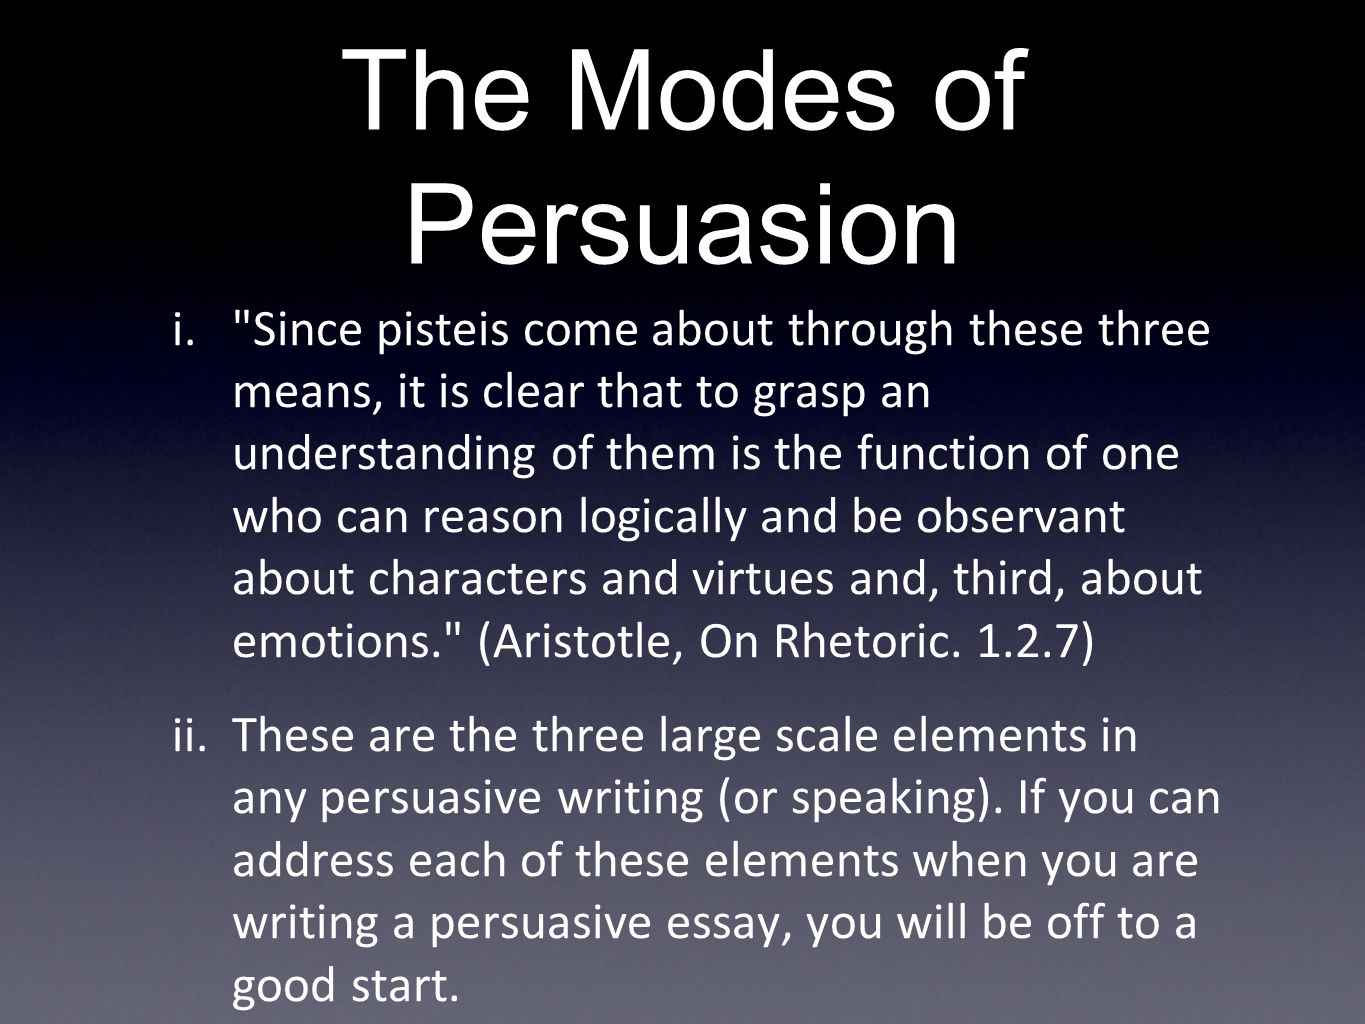 what is the purpose of persuasion in rhetorical modes